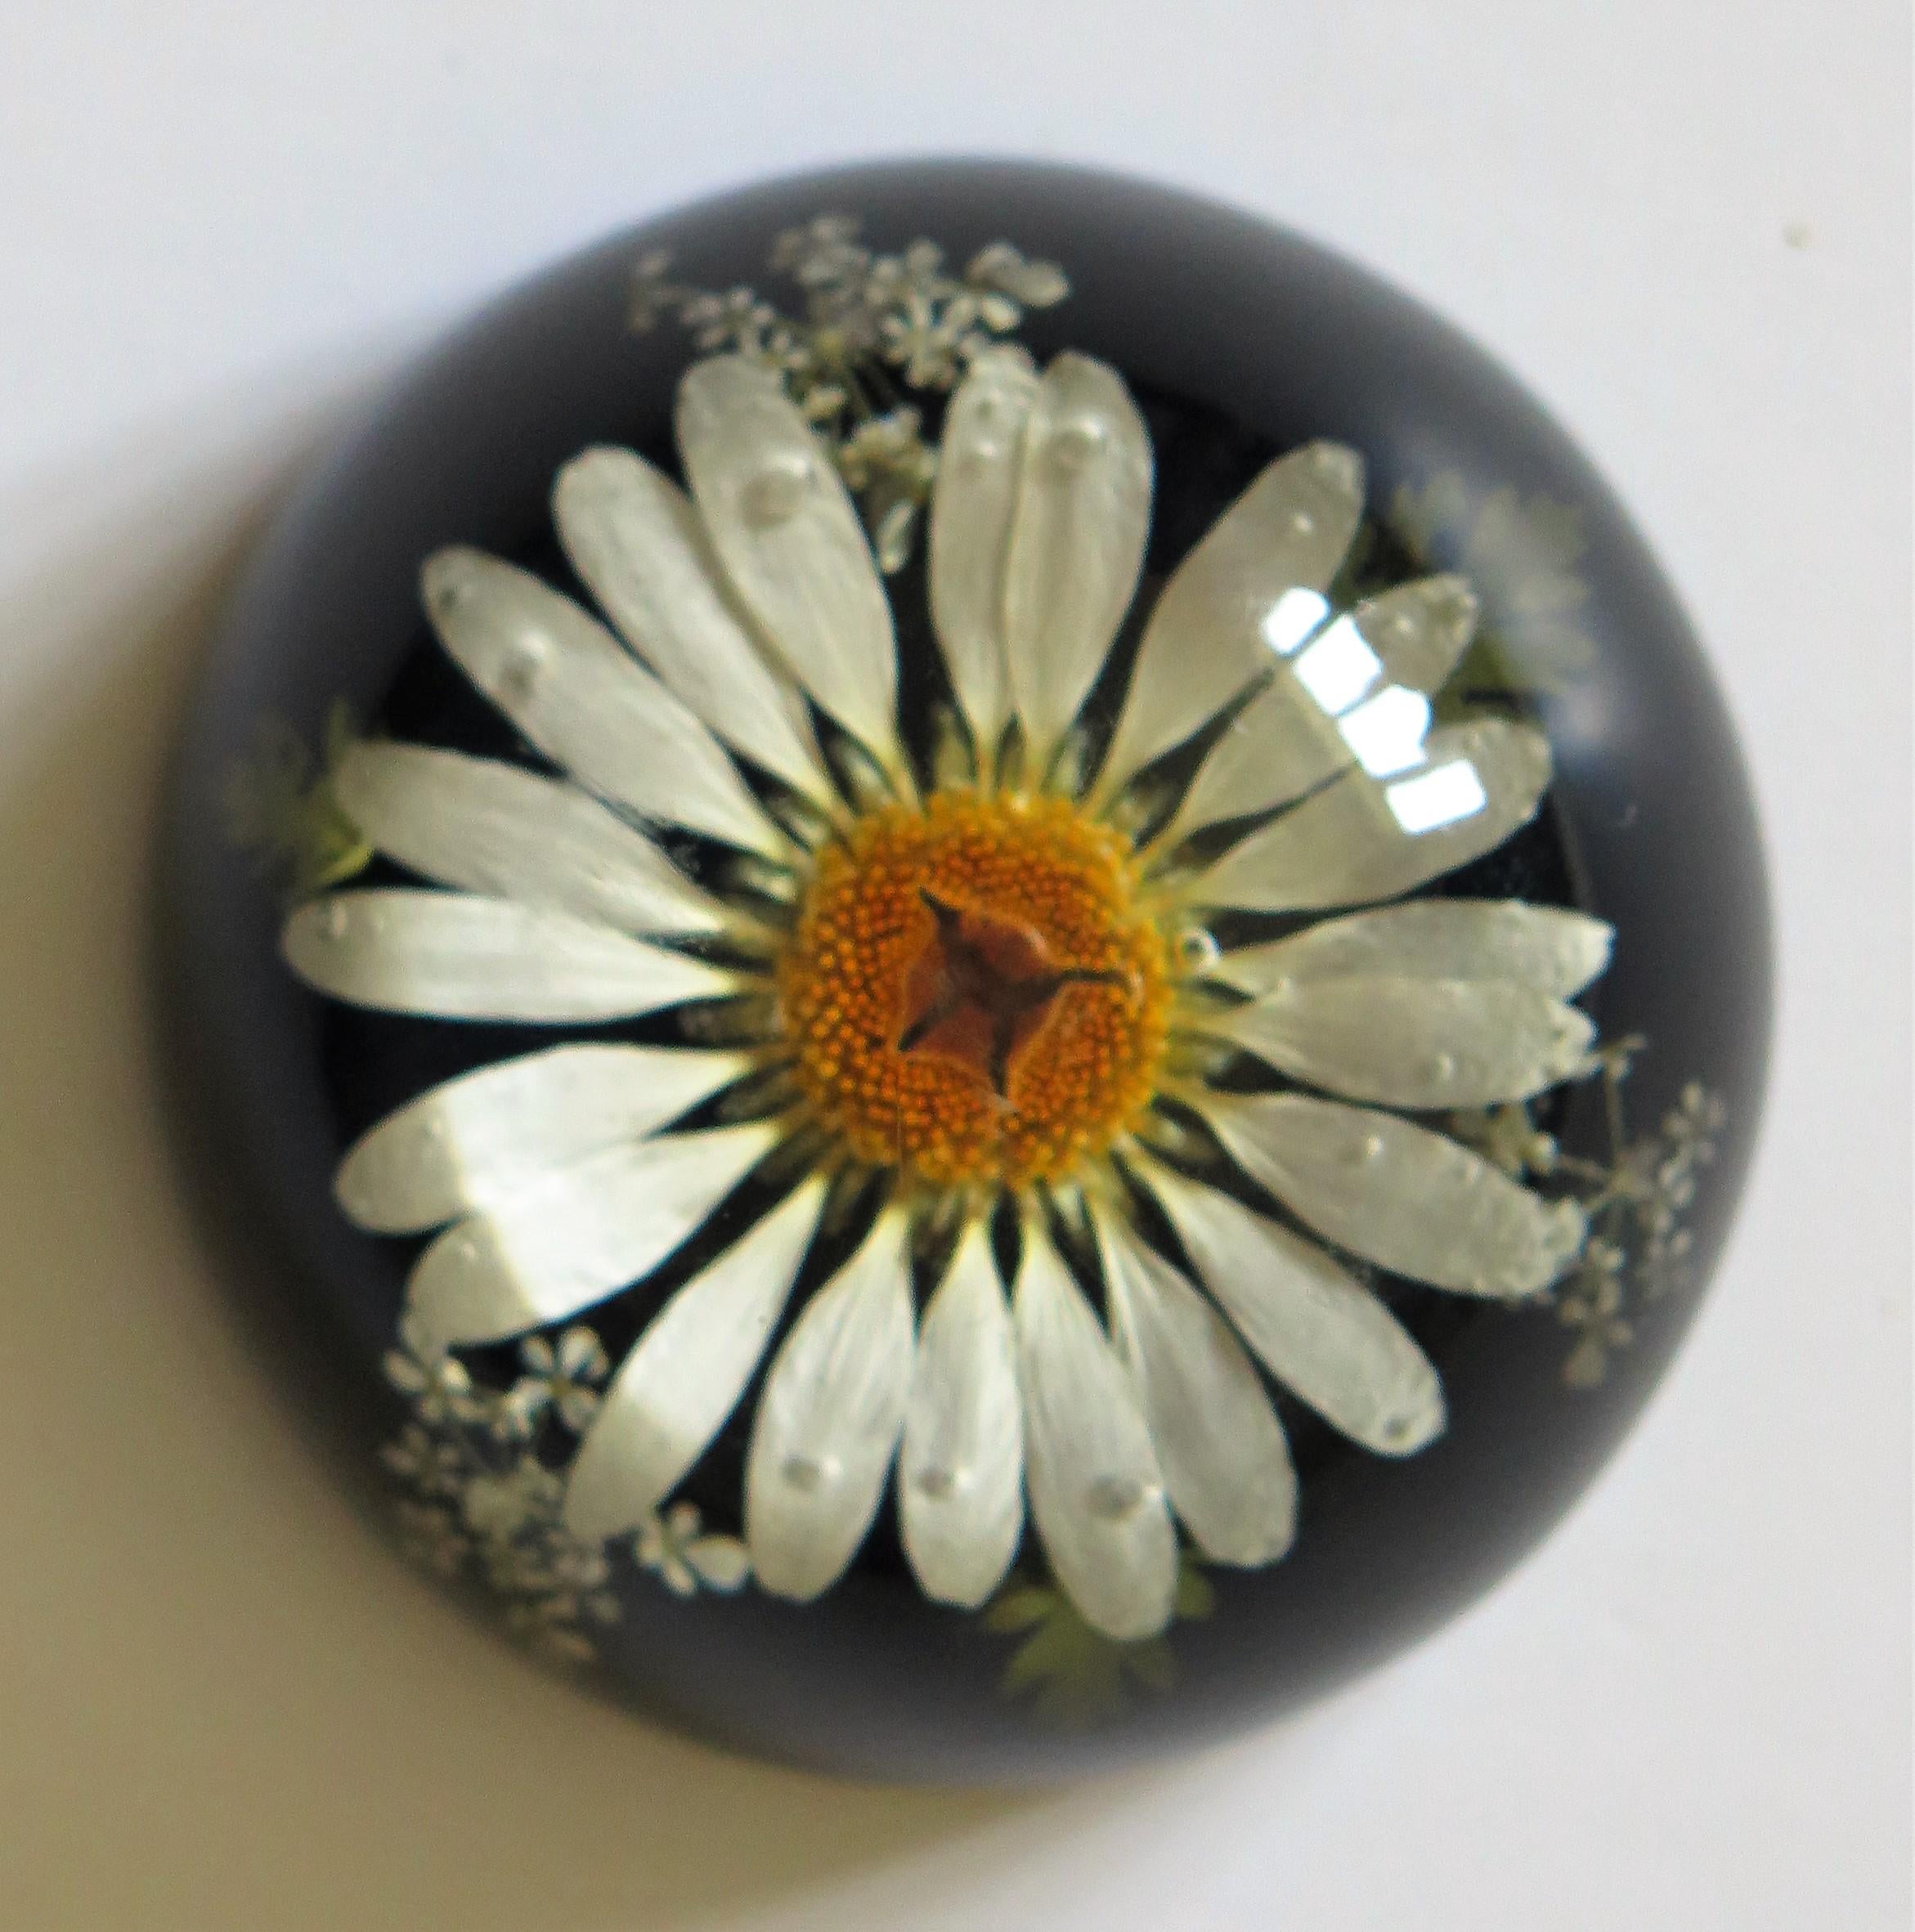 Daisy Paperweight Handmade with Real Flowers by Sarah Rogers, English 7